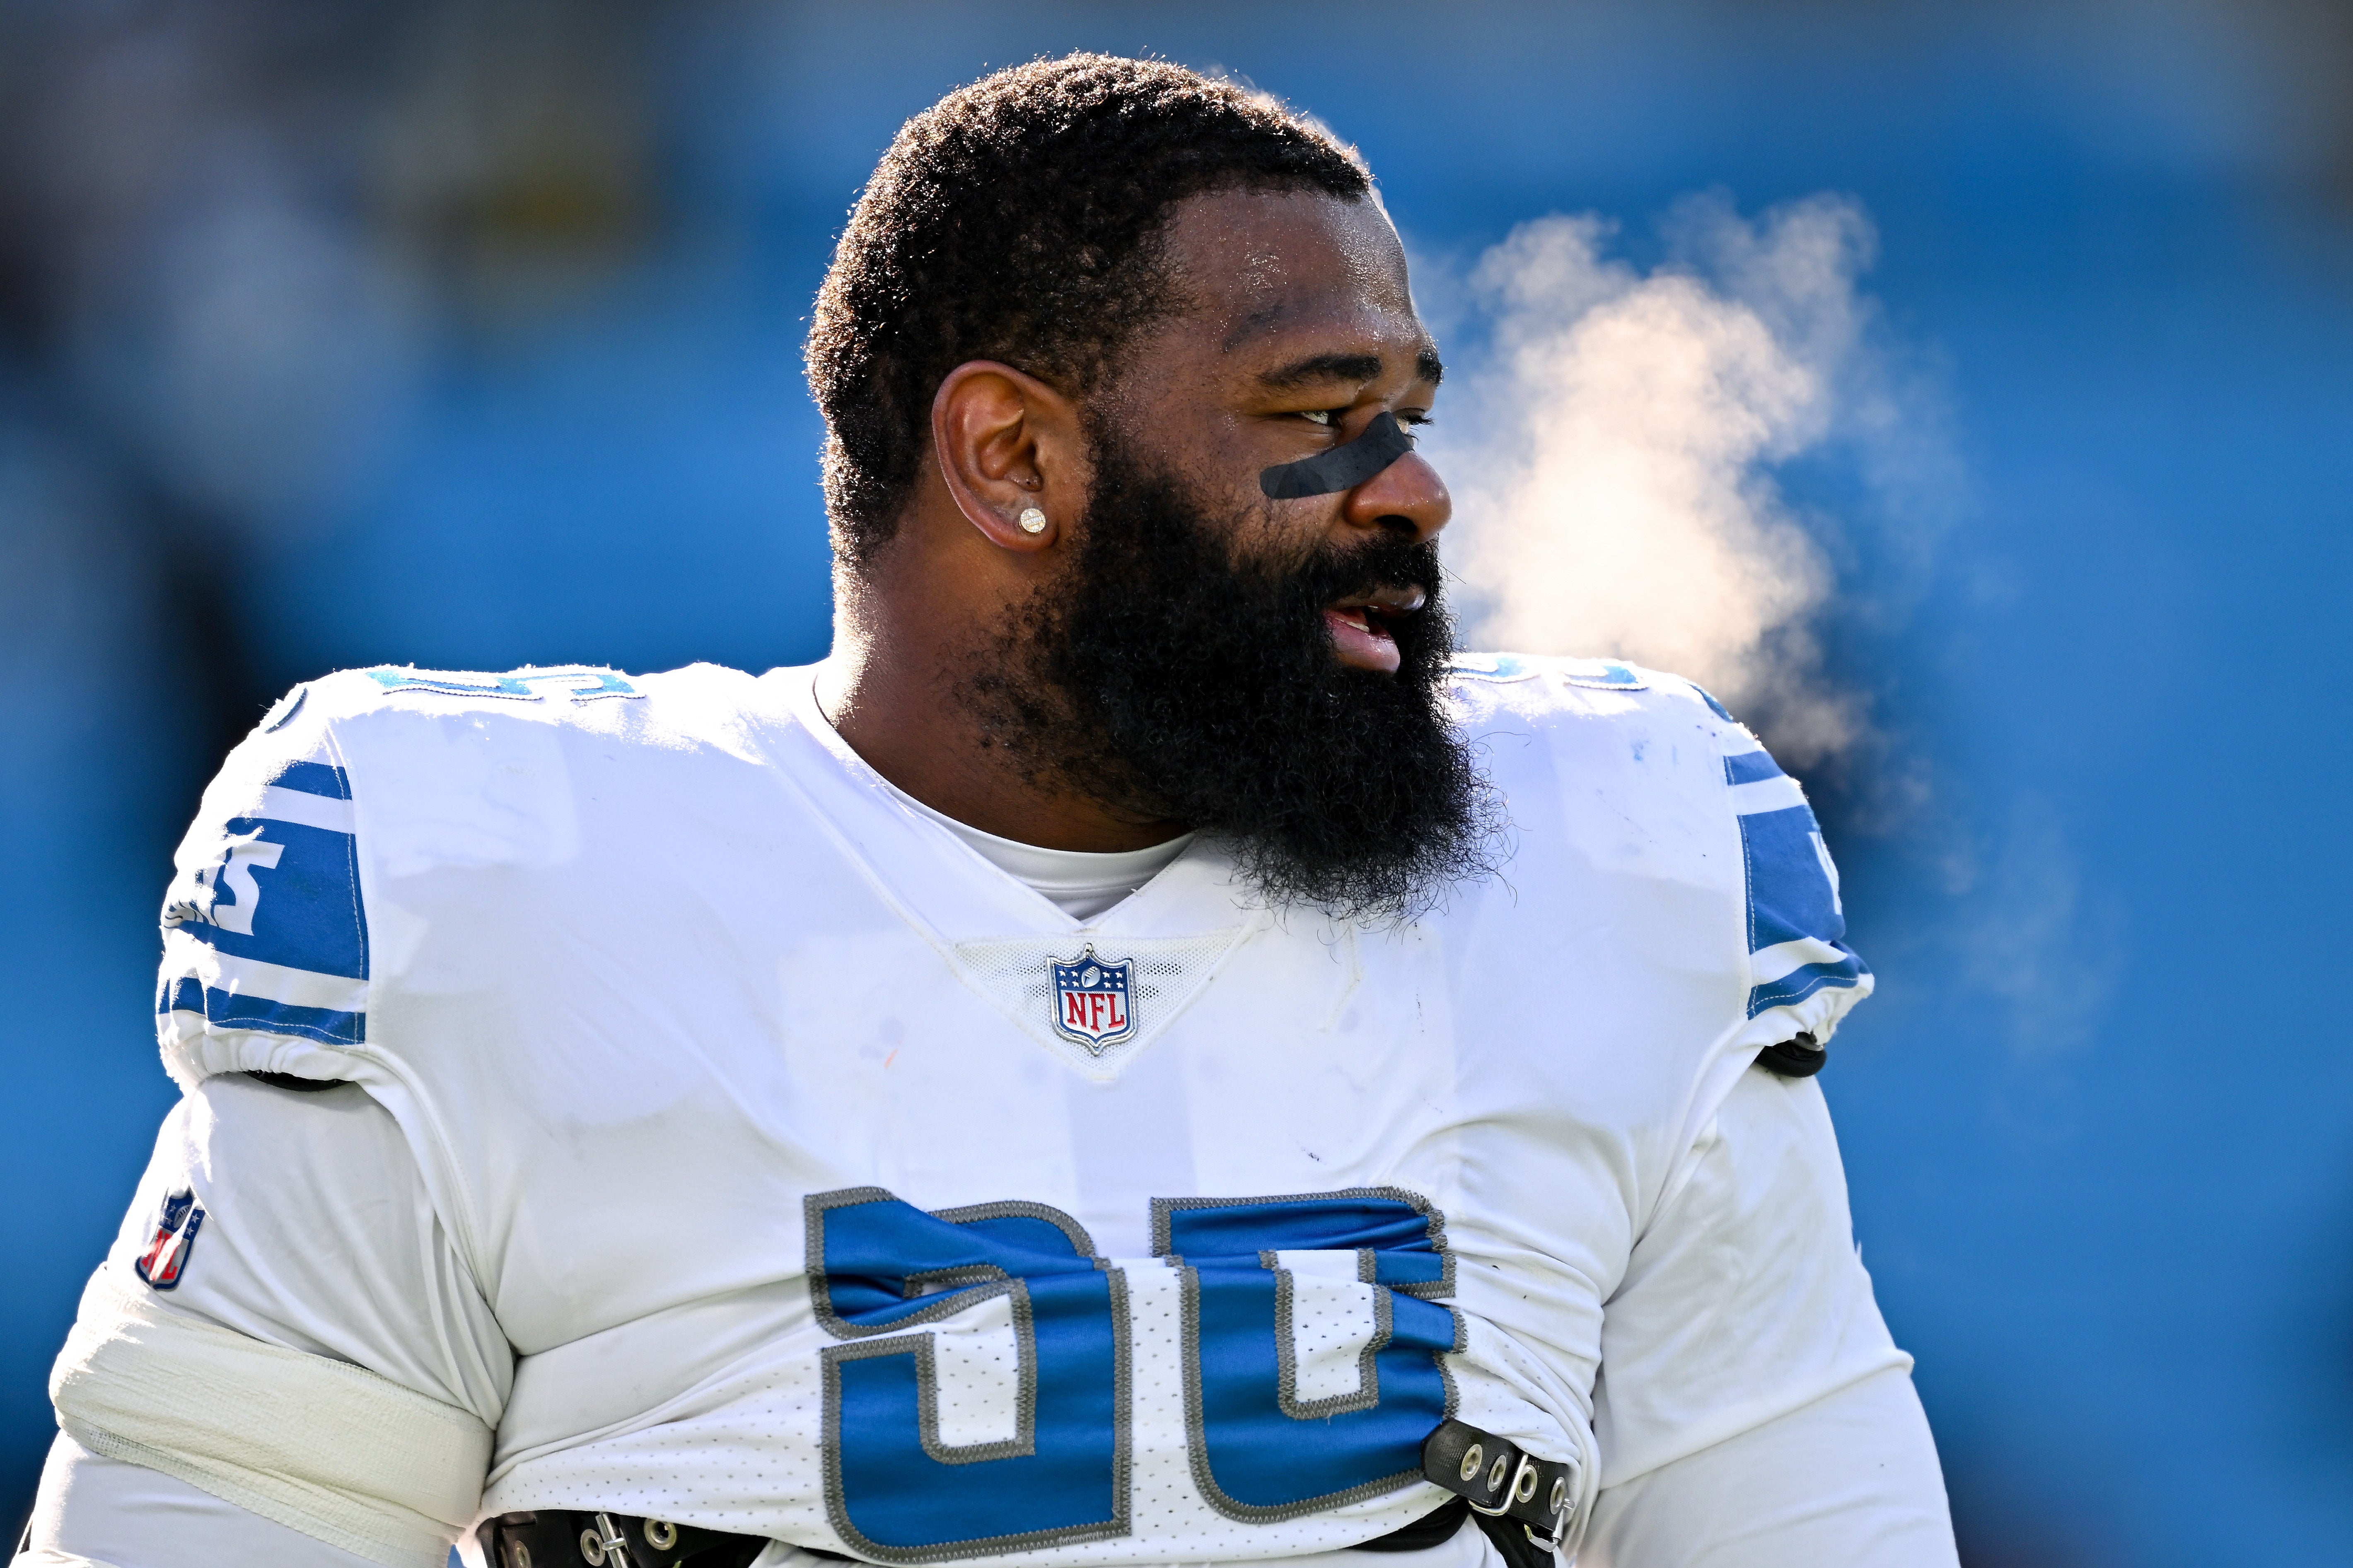 The Kansas City Chief have dropped defensive lineman Isaiah Buggs, 27, following multiple incidents this offseason, including alleged domestic violence and animal cruelty